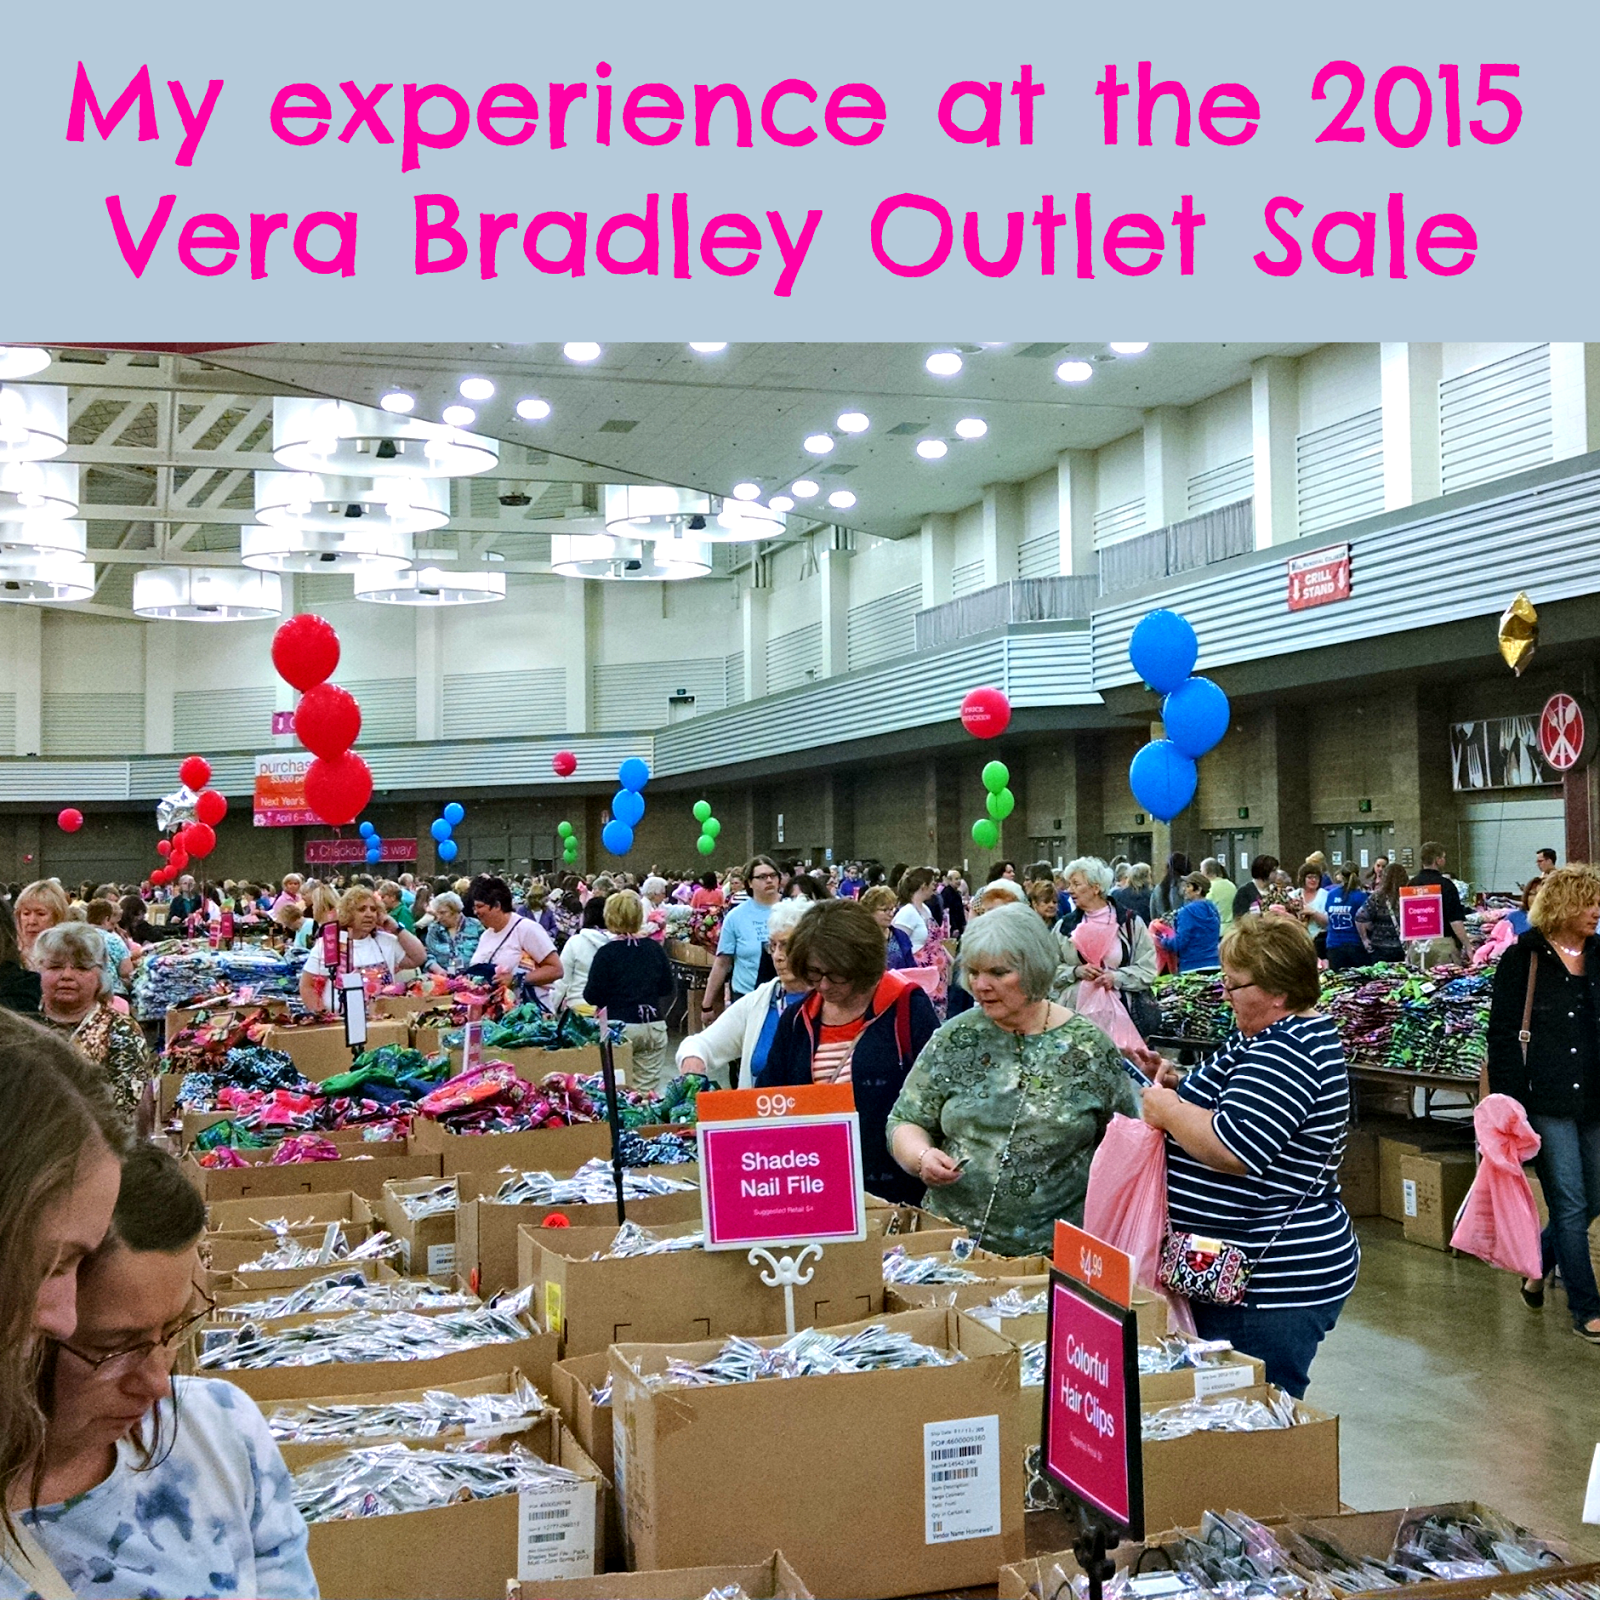 Yesterday was my day to shop at the Vera Bradley Outlet Sale. I had so ...